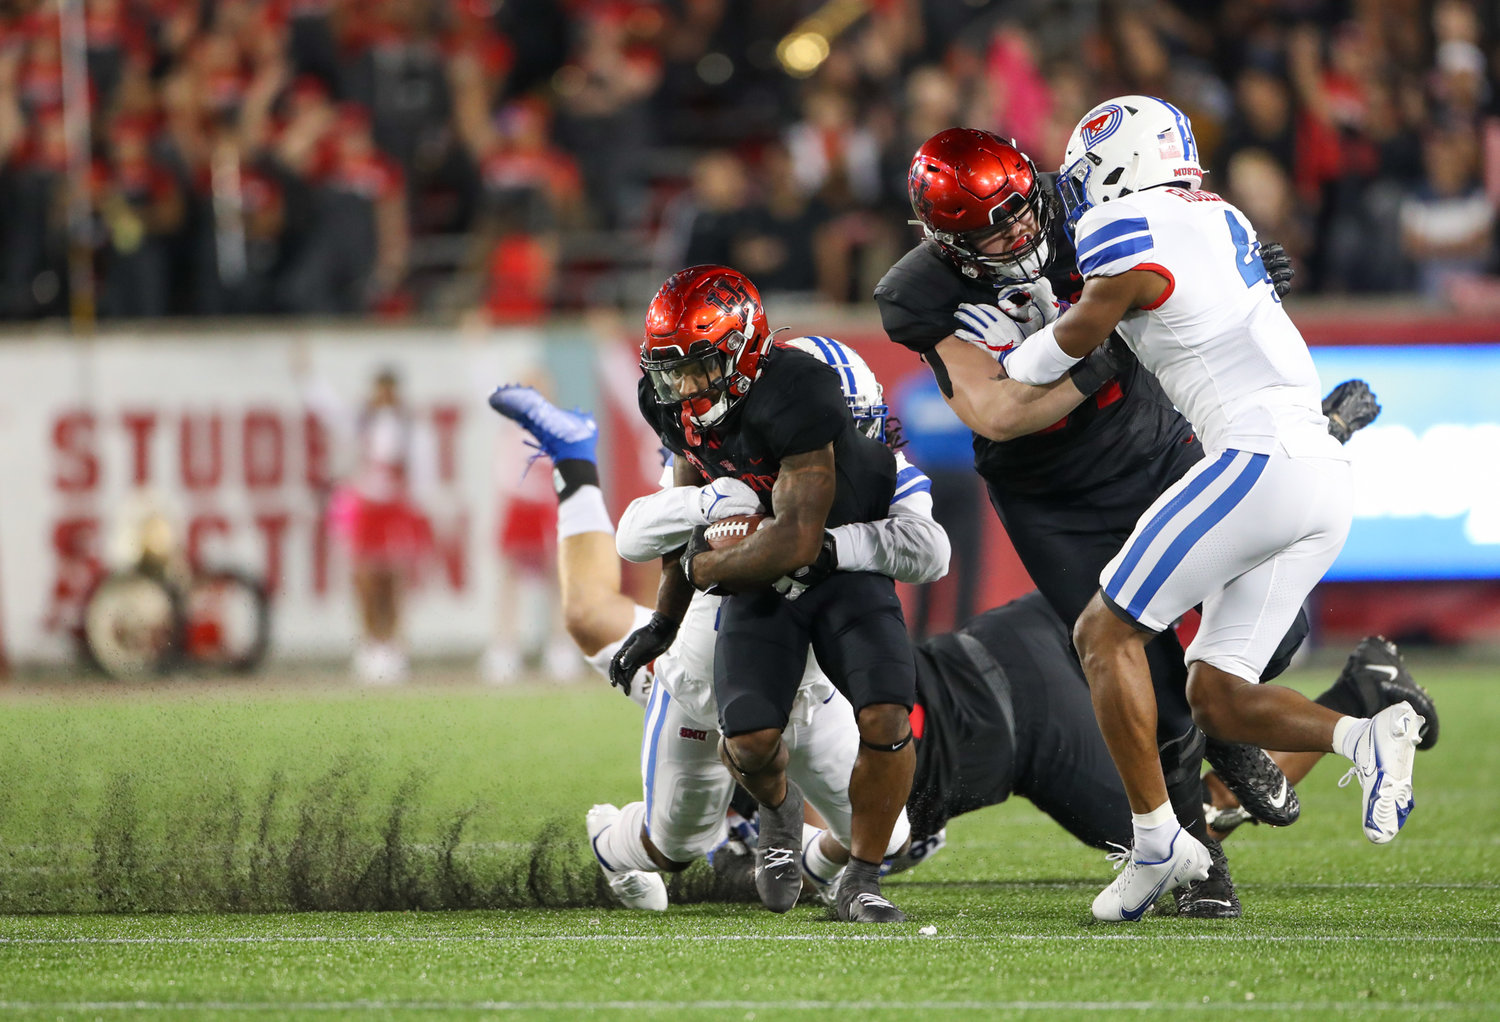 Houston Cougars running back Ta'Zhawn Henry (4) carries the ball during an NCAA football game between Houston and SMU on October 30, 2021 in Houston, Texas.